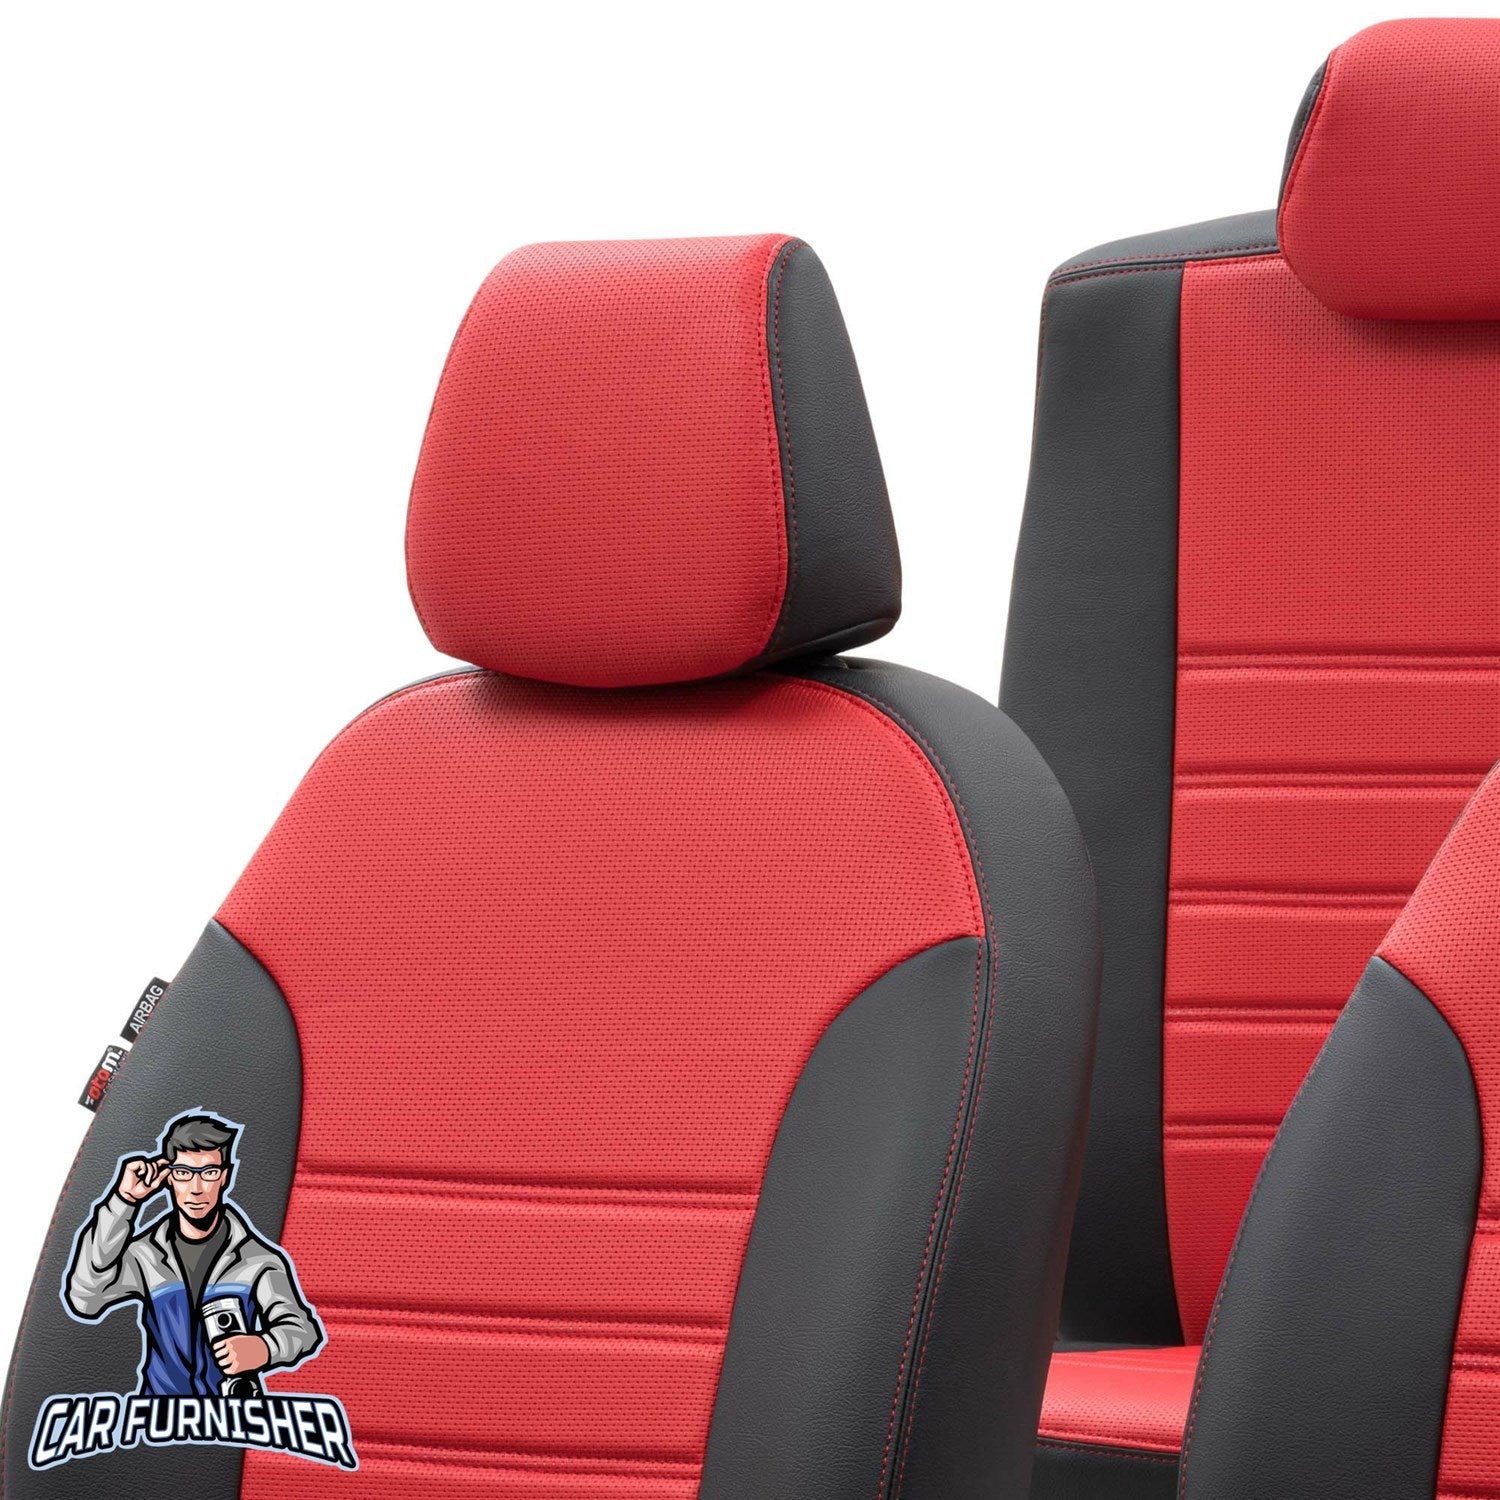 Kia Soul Seat Covers New York Leather Design Red Leather